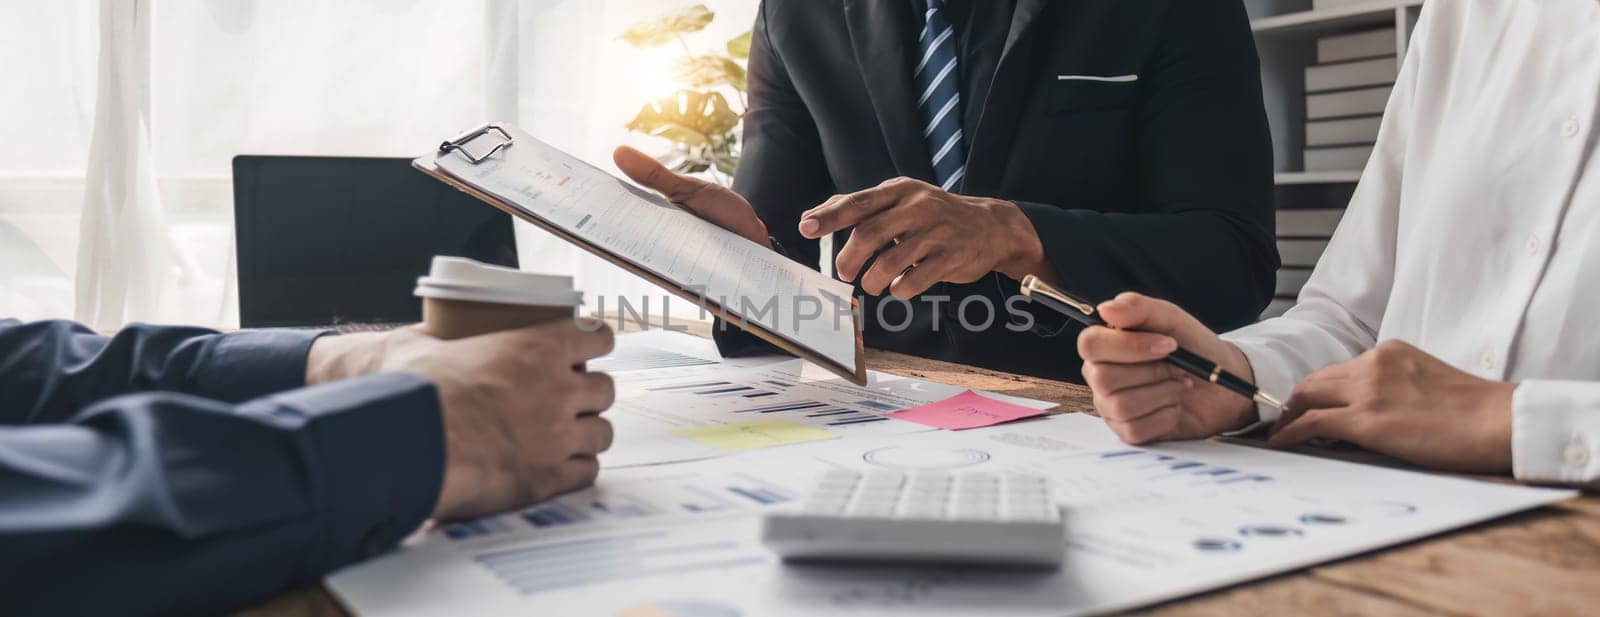 Business People Meeting using laptop computer,calculator,notebook,stock market chart paper for analysis Plans to improve quality next month. Conference Discussion Corporate Concept